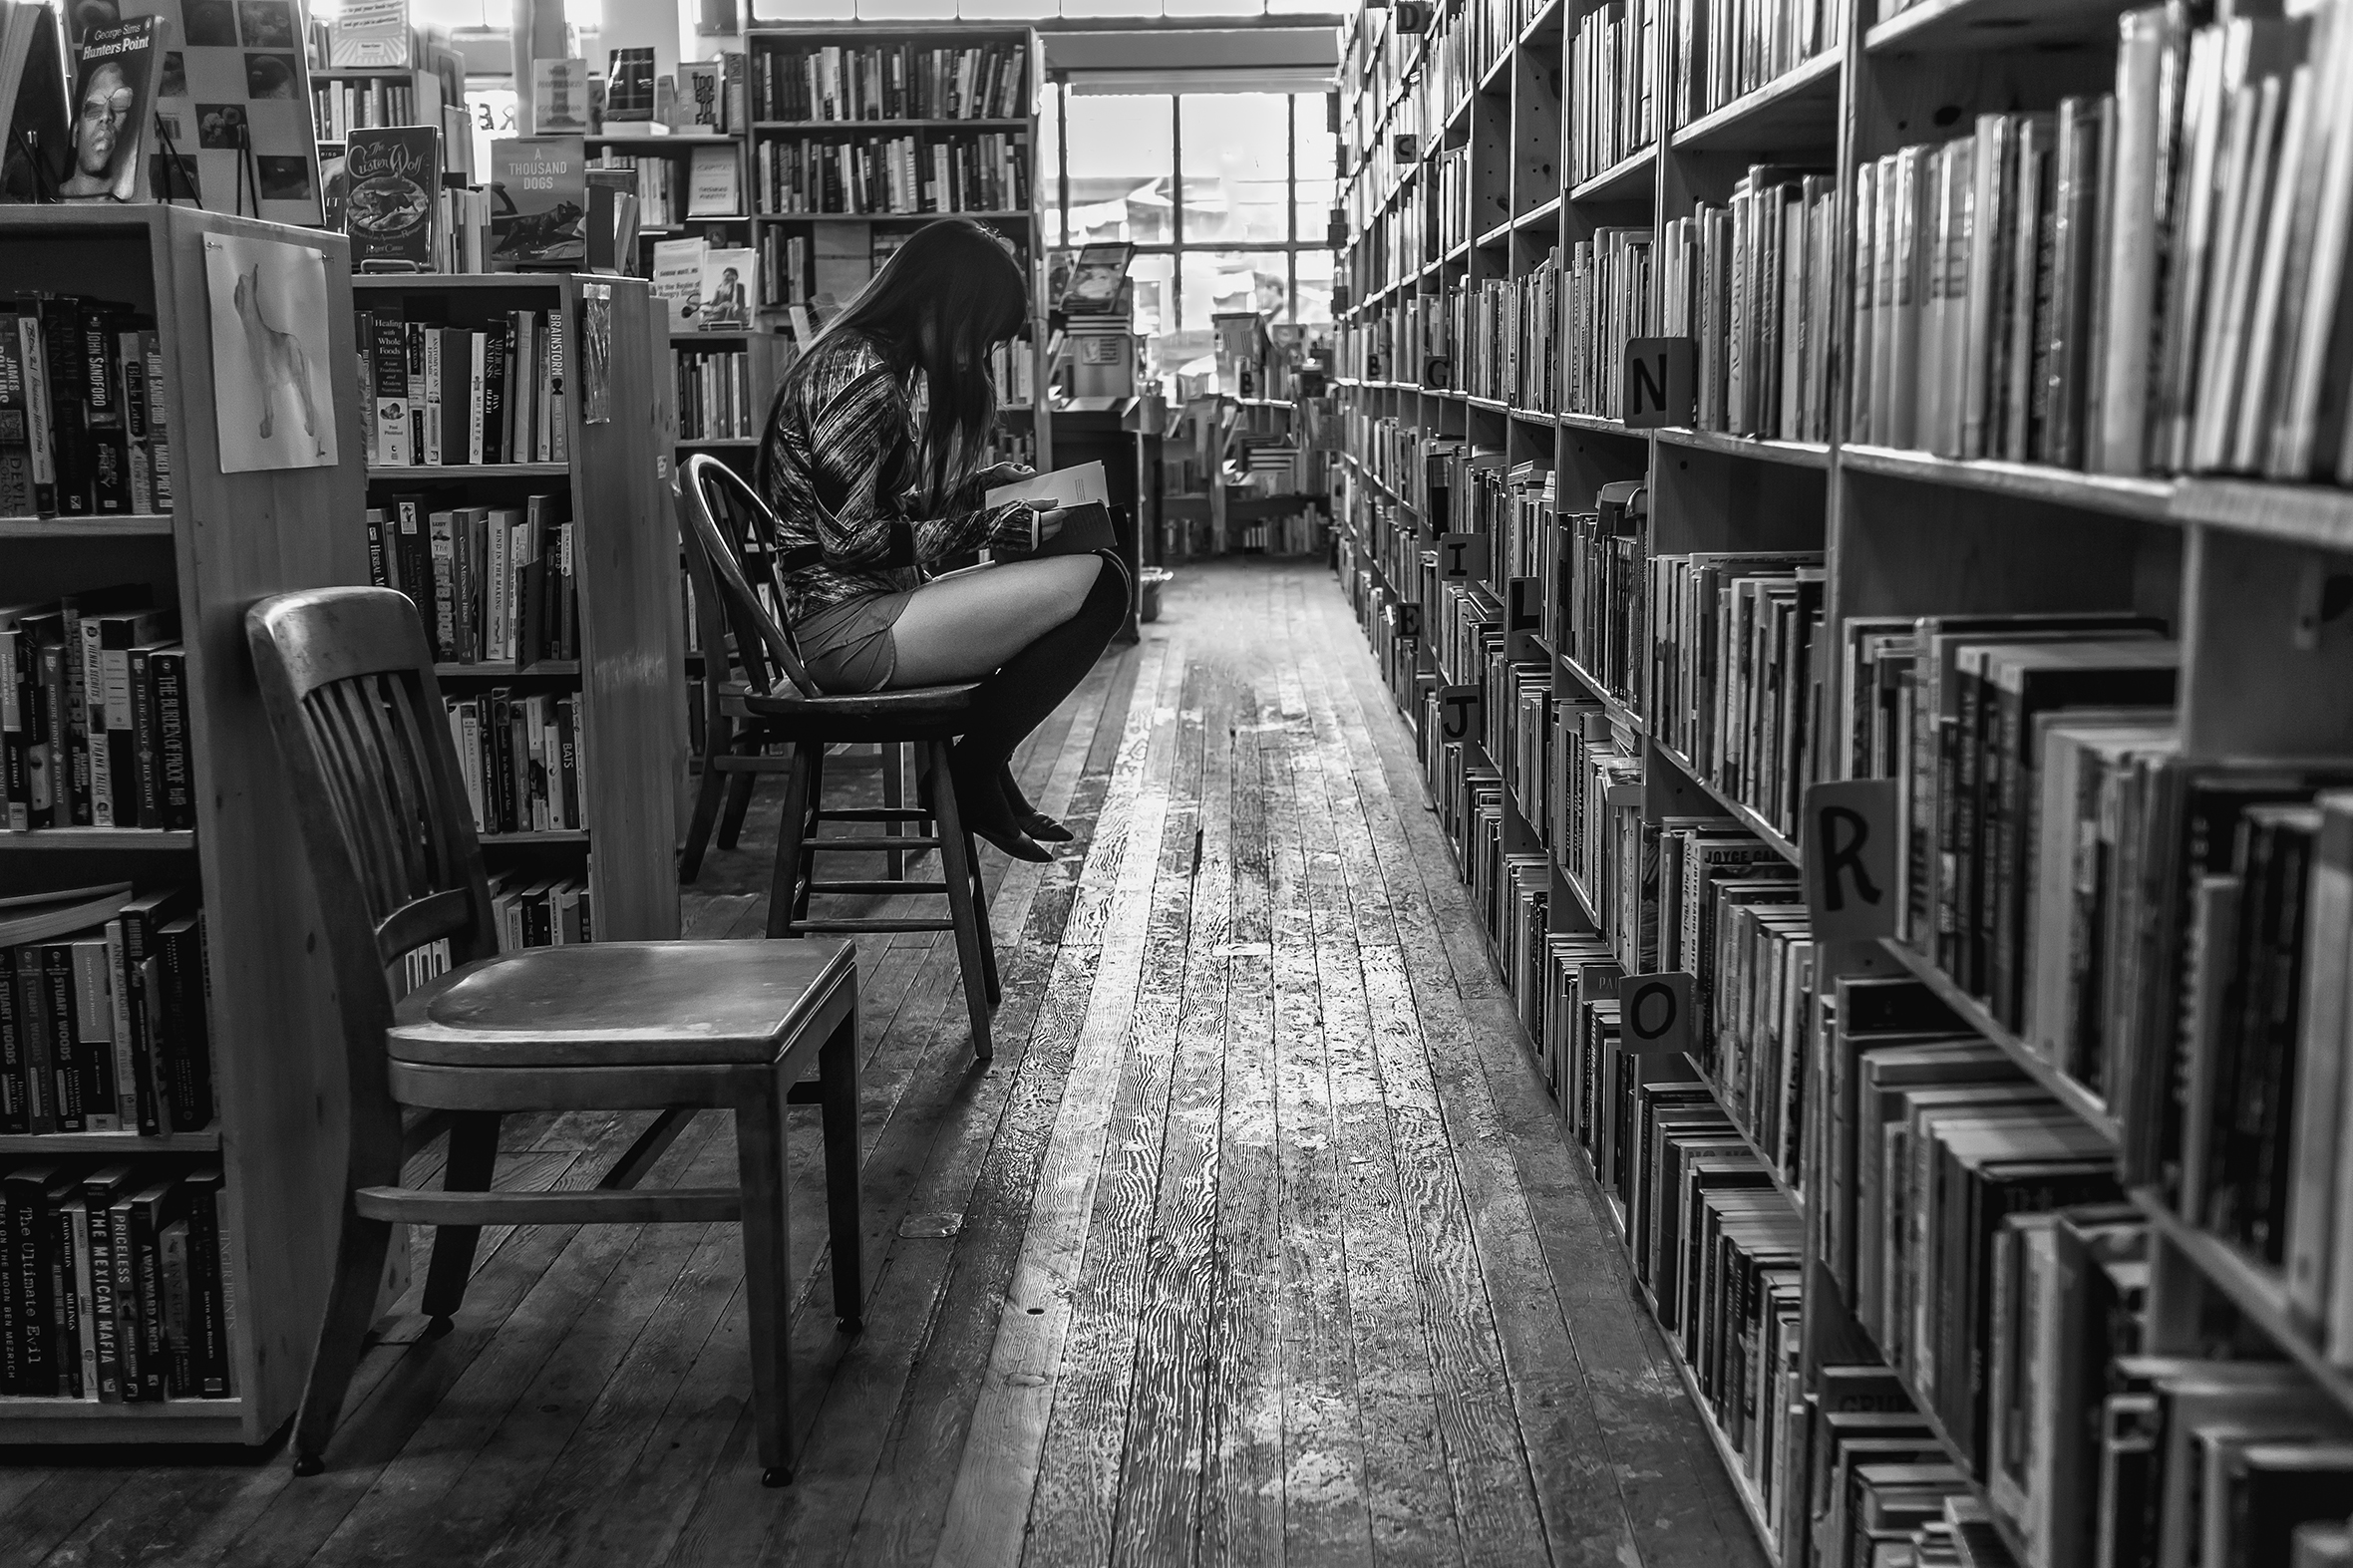 Looking down a main aisle of a bookstore with wood flooring to the large windows at the front. On the left, a girl reading a book is sitting on a wooden chair at the end of a bookcase facing a multitiered bookcase that runs the length of the long aisle.